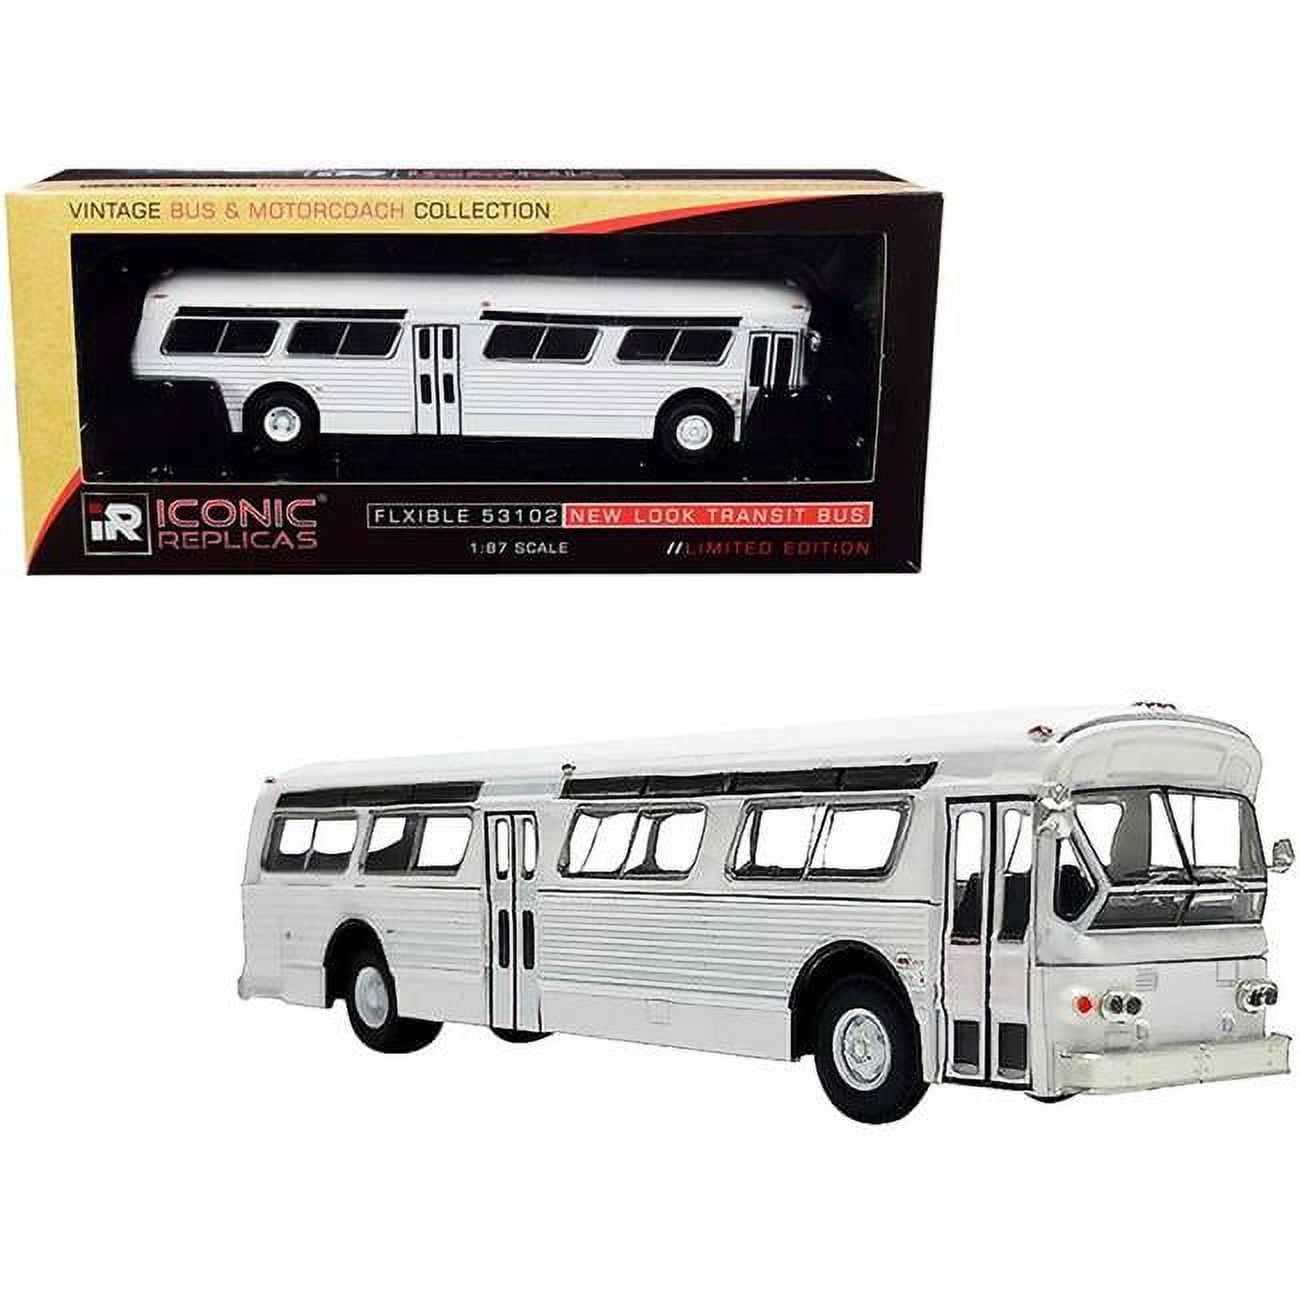 Picture of Iconic Replicas 87-0242 Flxible 53102 Transit Bus Blank White Vintage Bus & Motorcoach Collection 1 by 87 Diecast Model Car